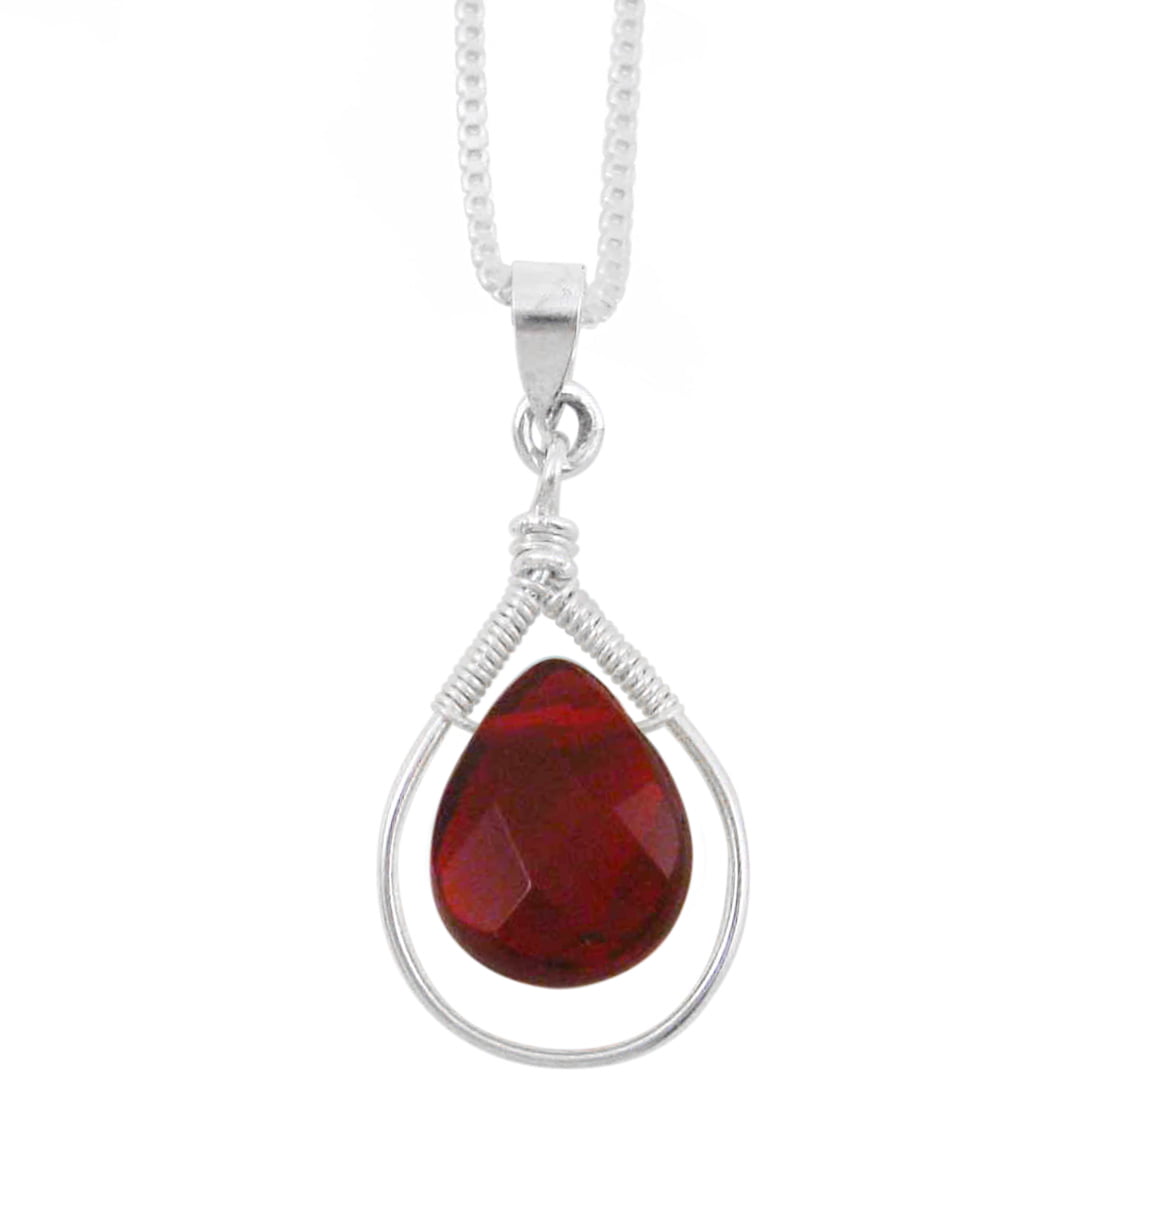 Zircon Crystal Gemstone Oxidized Sterling Silver Wire Wrapped Pendant Charm Ready to Ship!